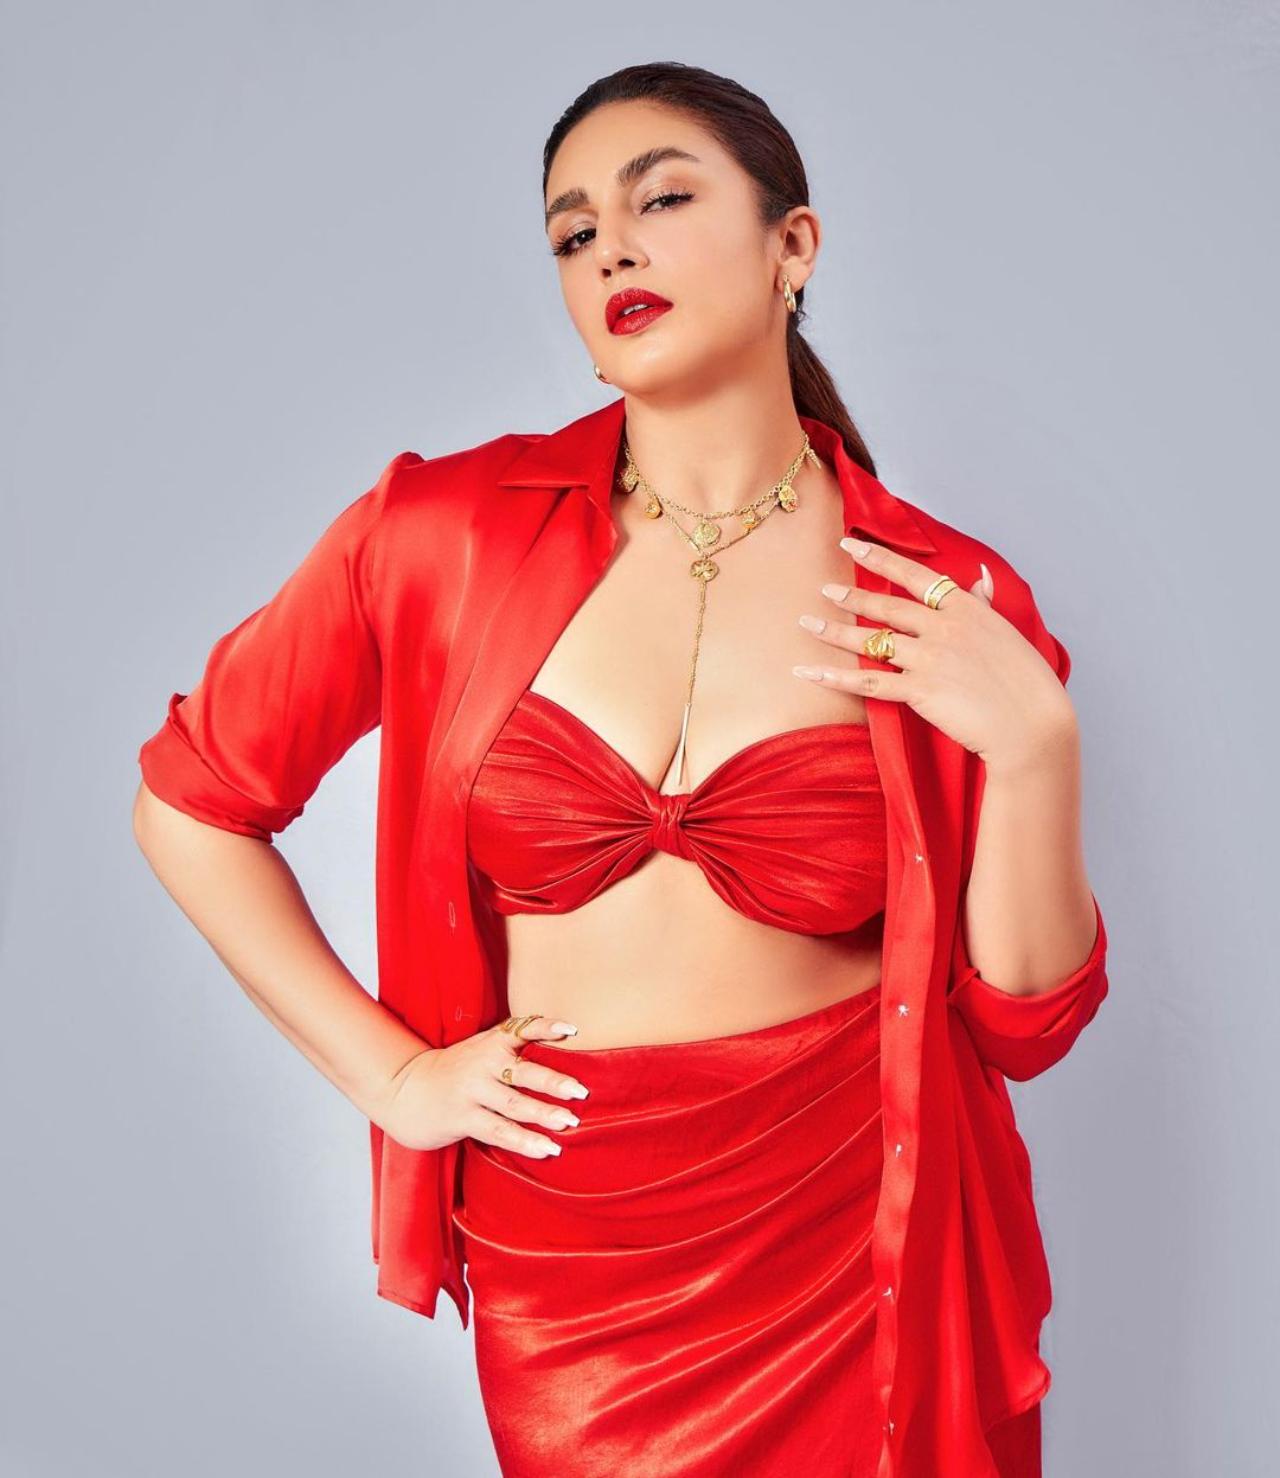 Huma opted for a bright red crimson bandeau top. She paired it with a similar coloured red side slit skirt. Huma completed the look with an unbuttoned red shirt. Her outfit is from the shelves of Aroka and Zara